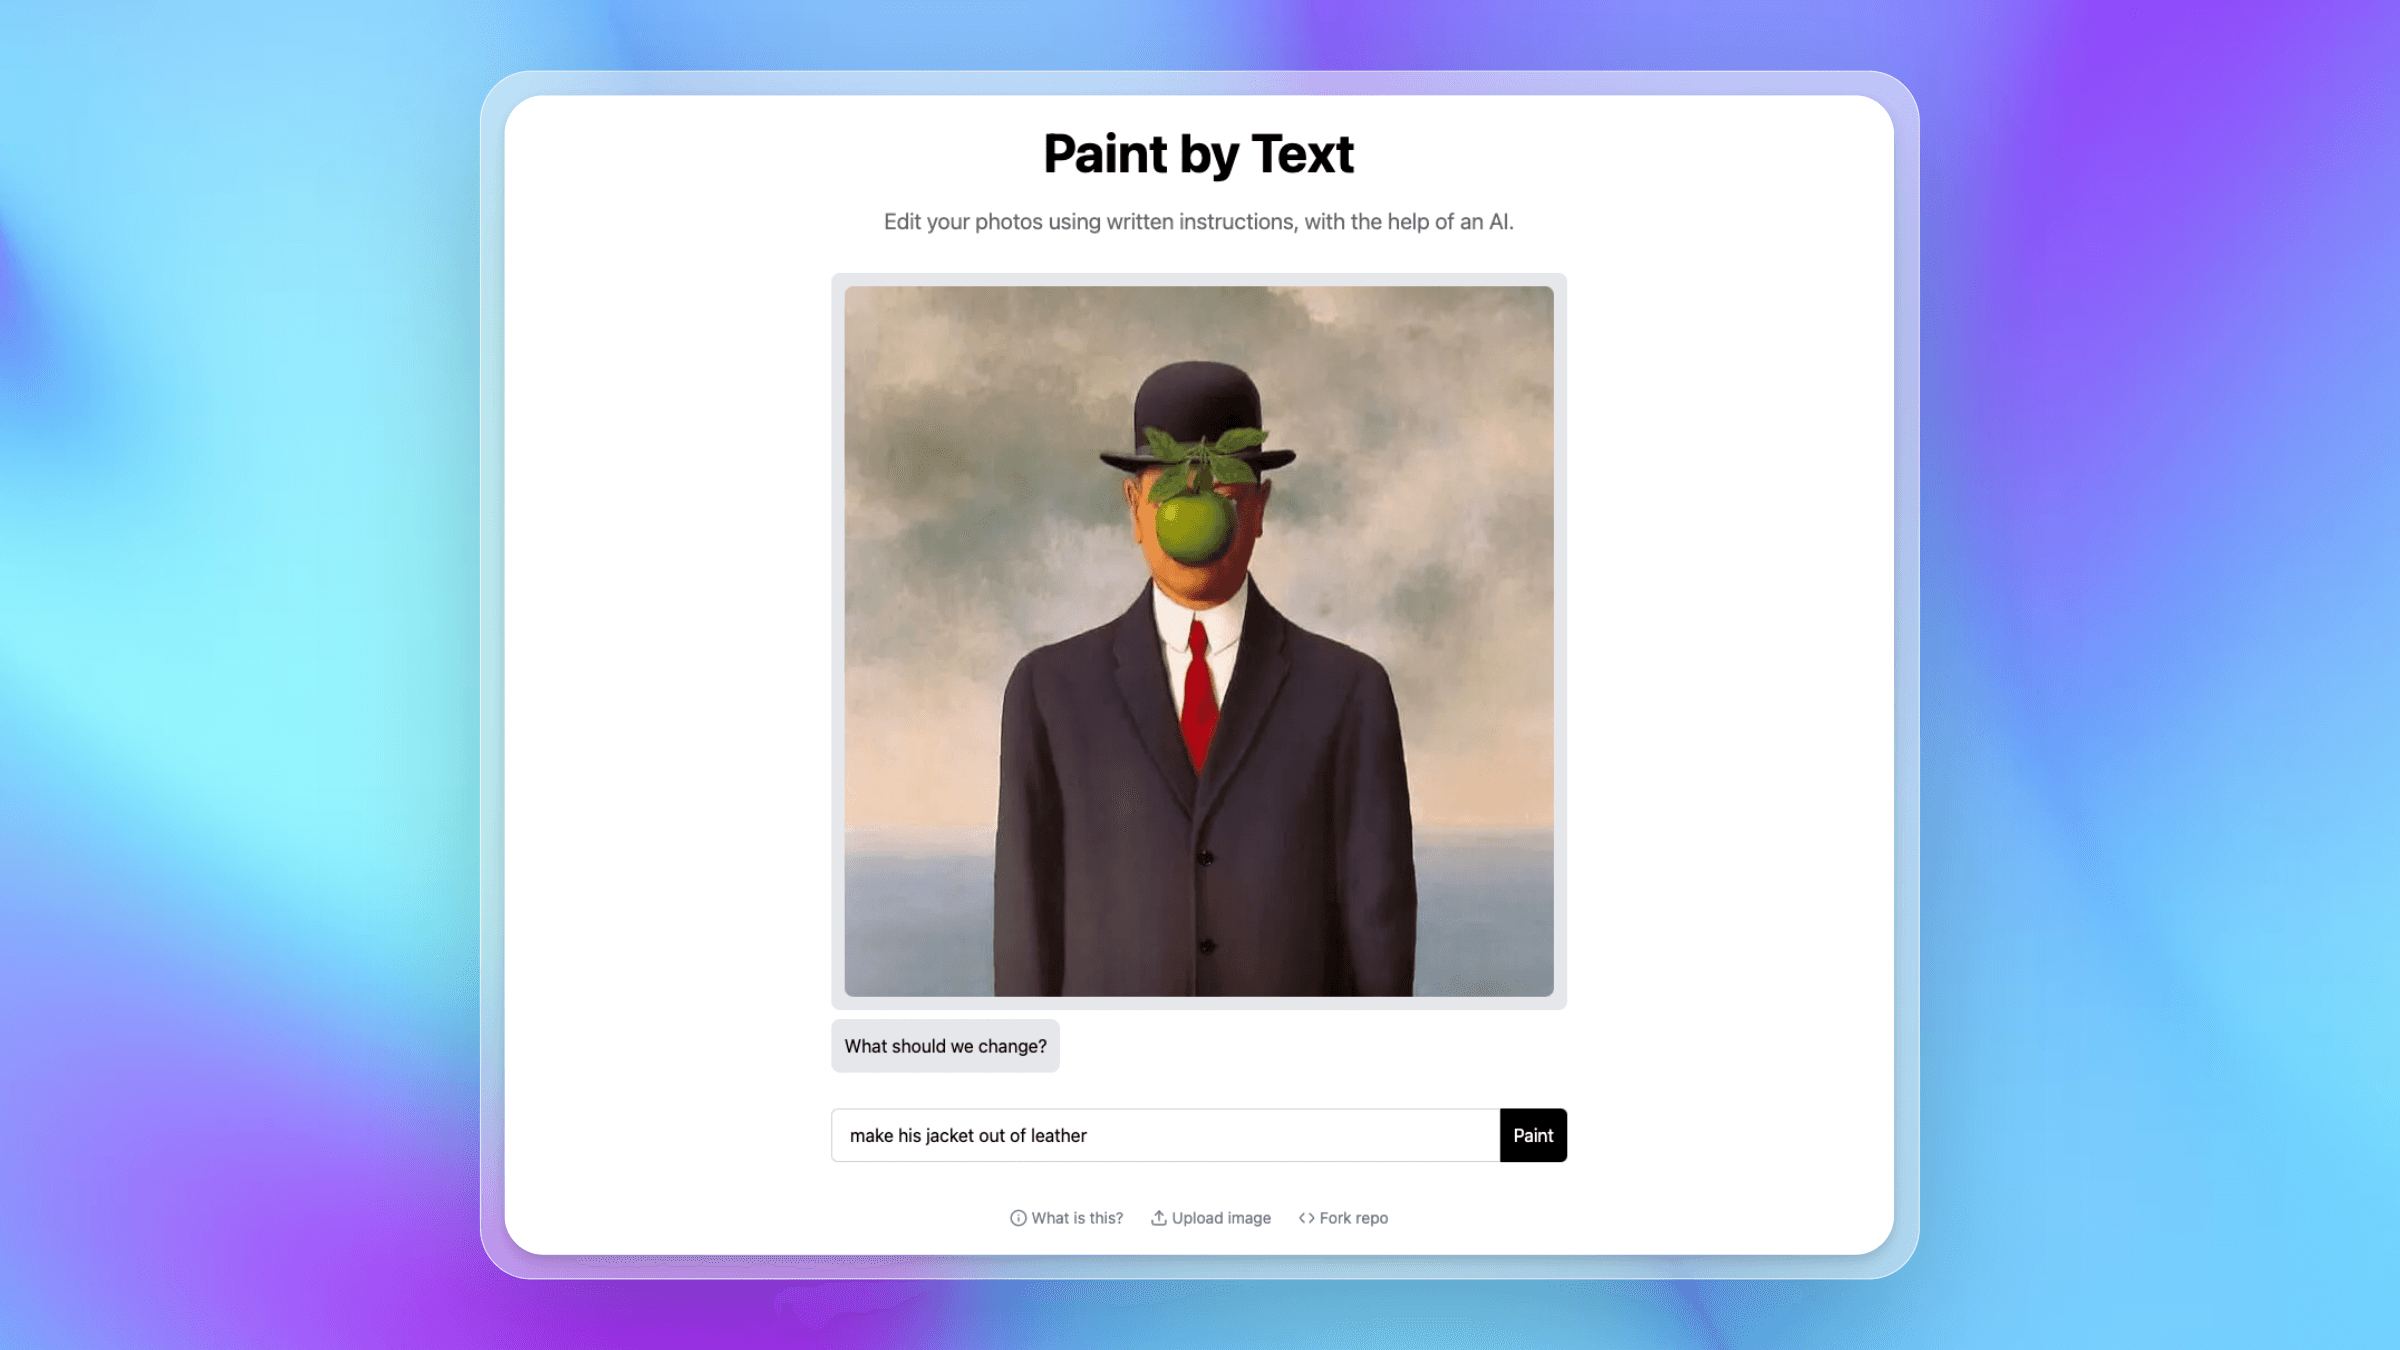 Paint by Text